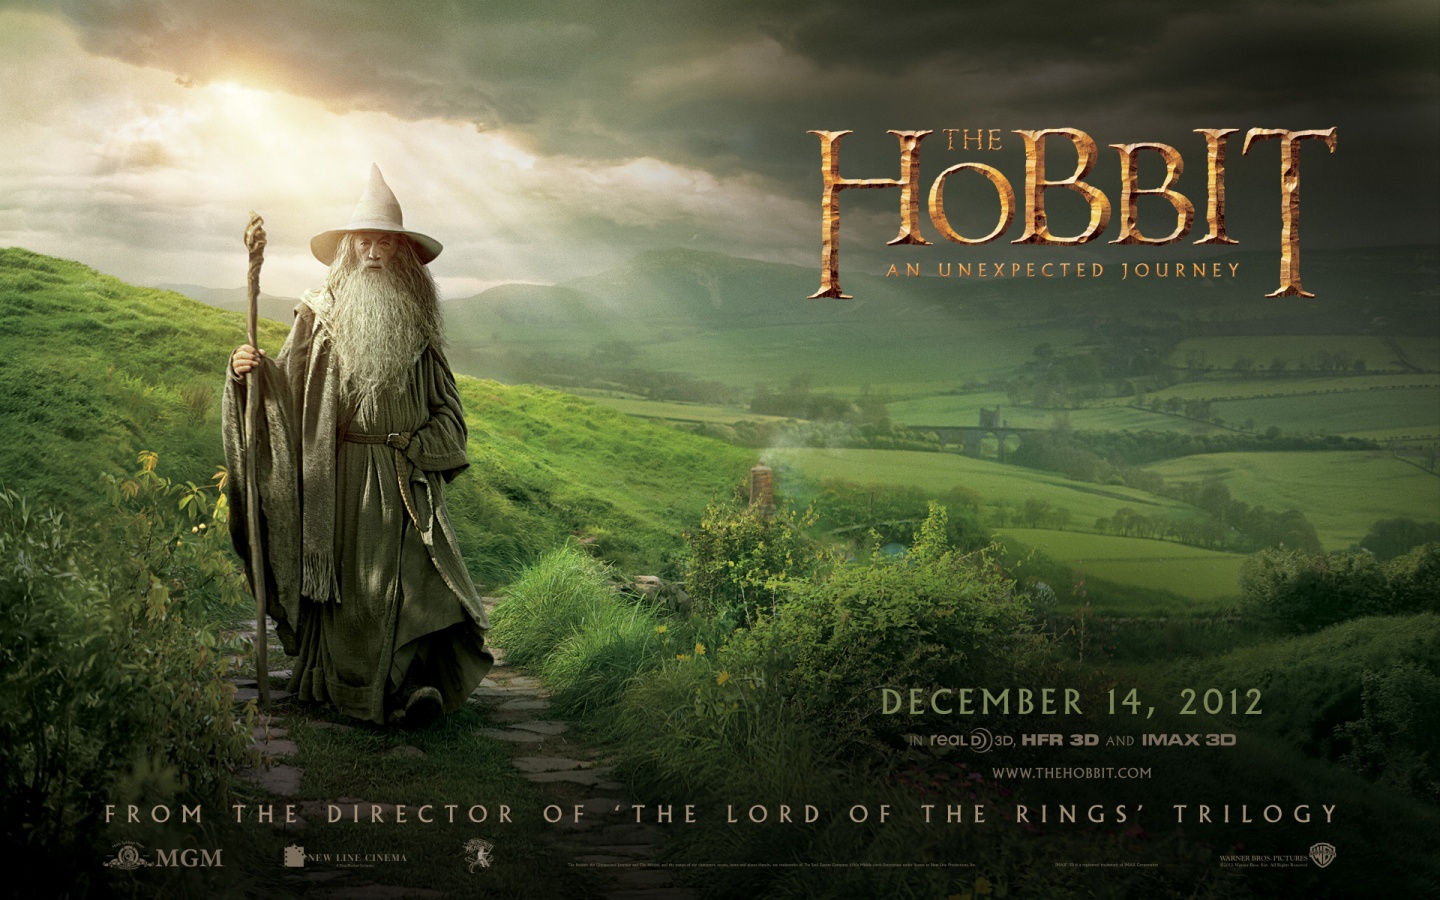 the hobbit: an unexpected journey, movie, the lord of the rings 32K